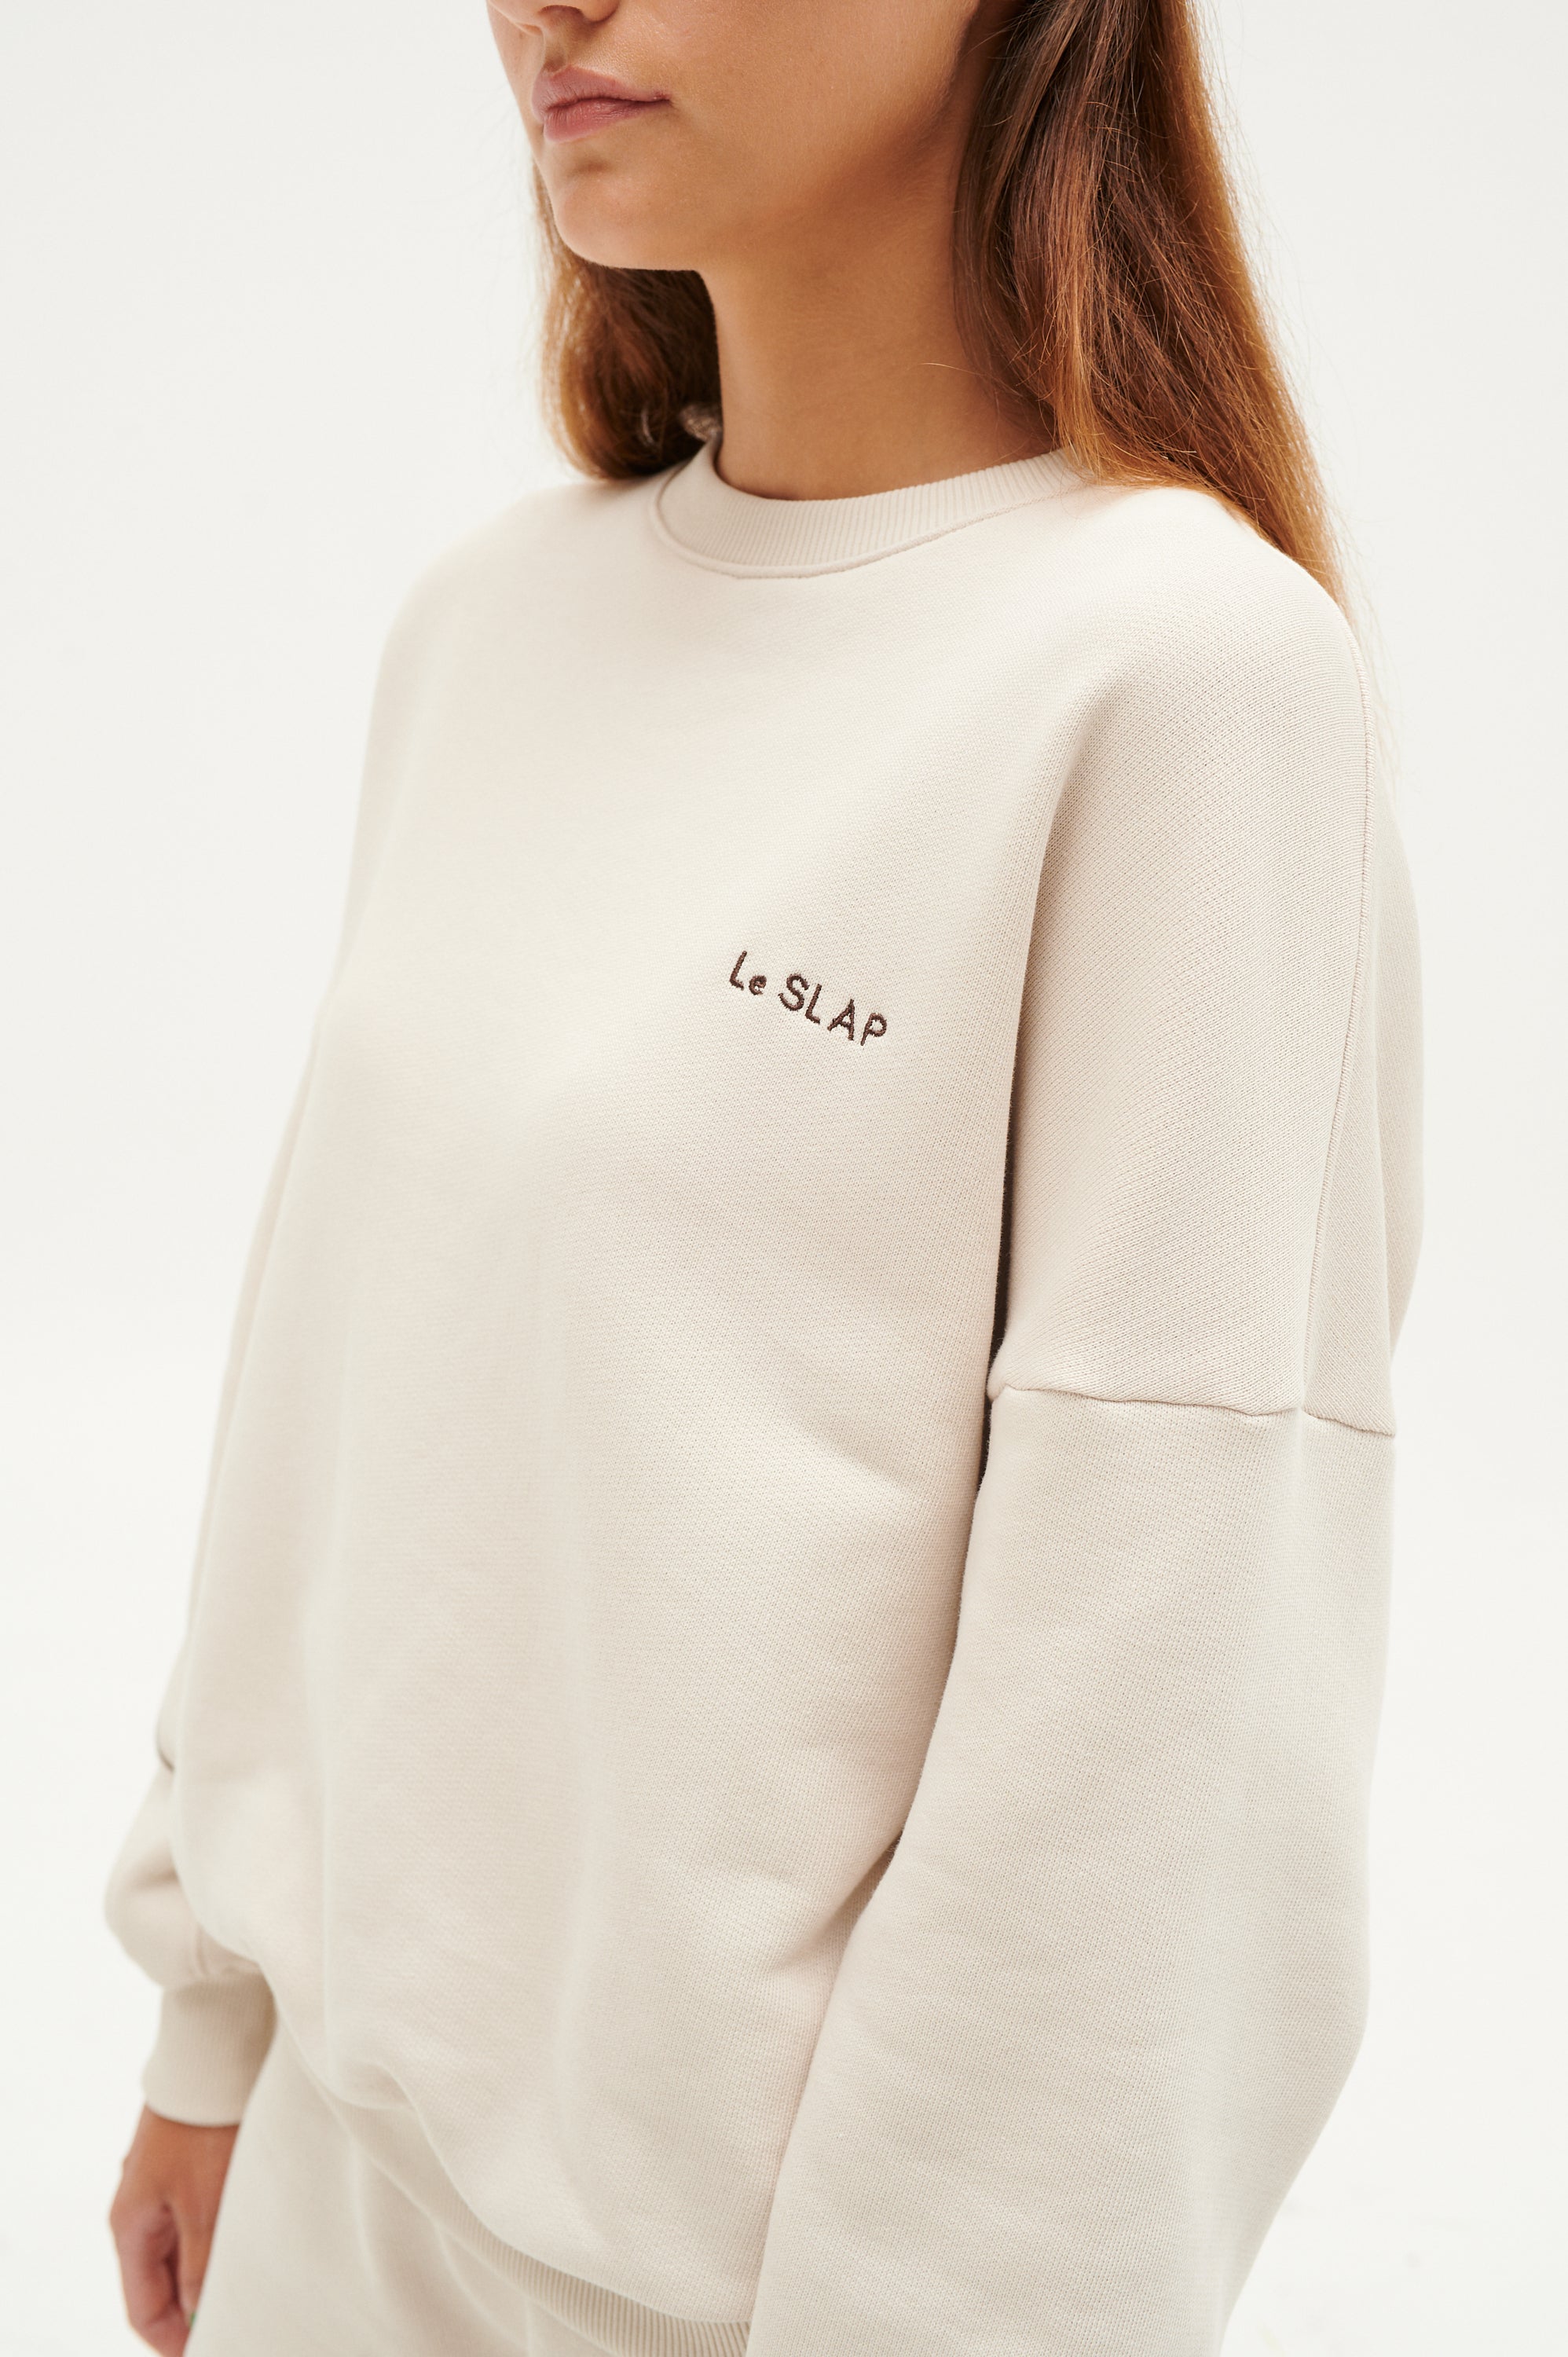 Le SLAP | UNIFORM She is a gun hoodie with brand's embroidery